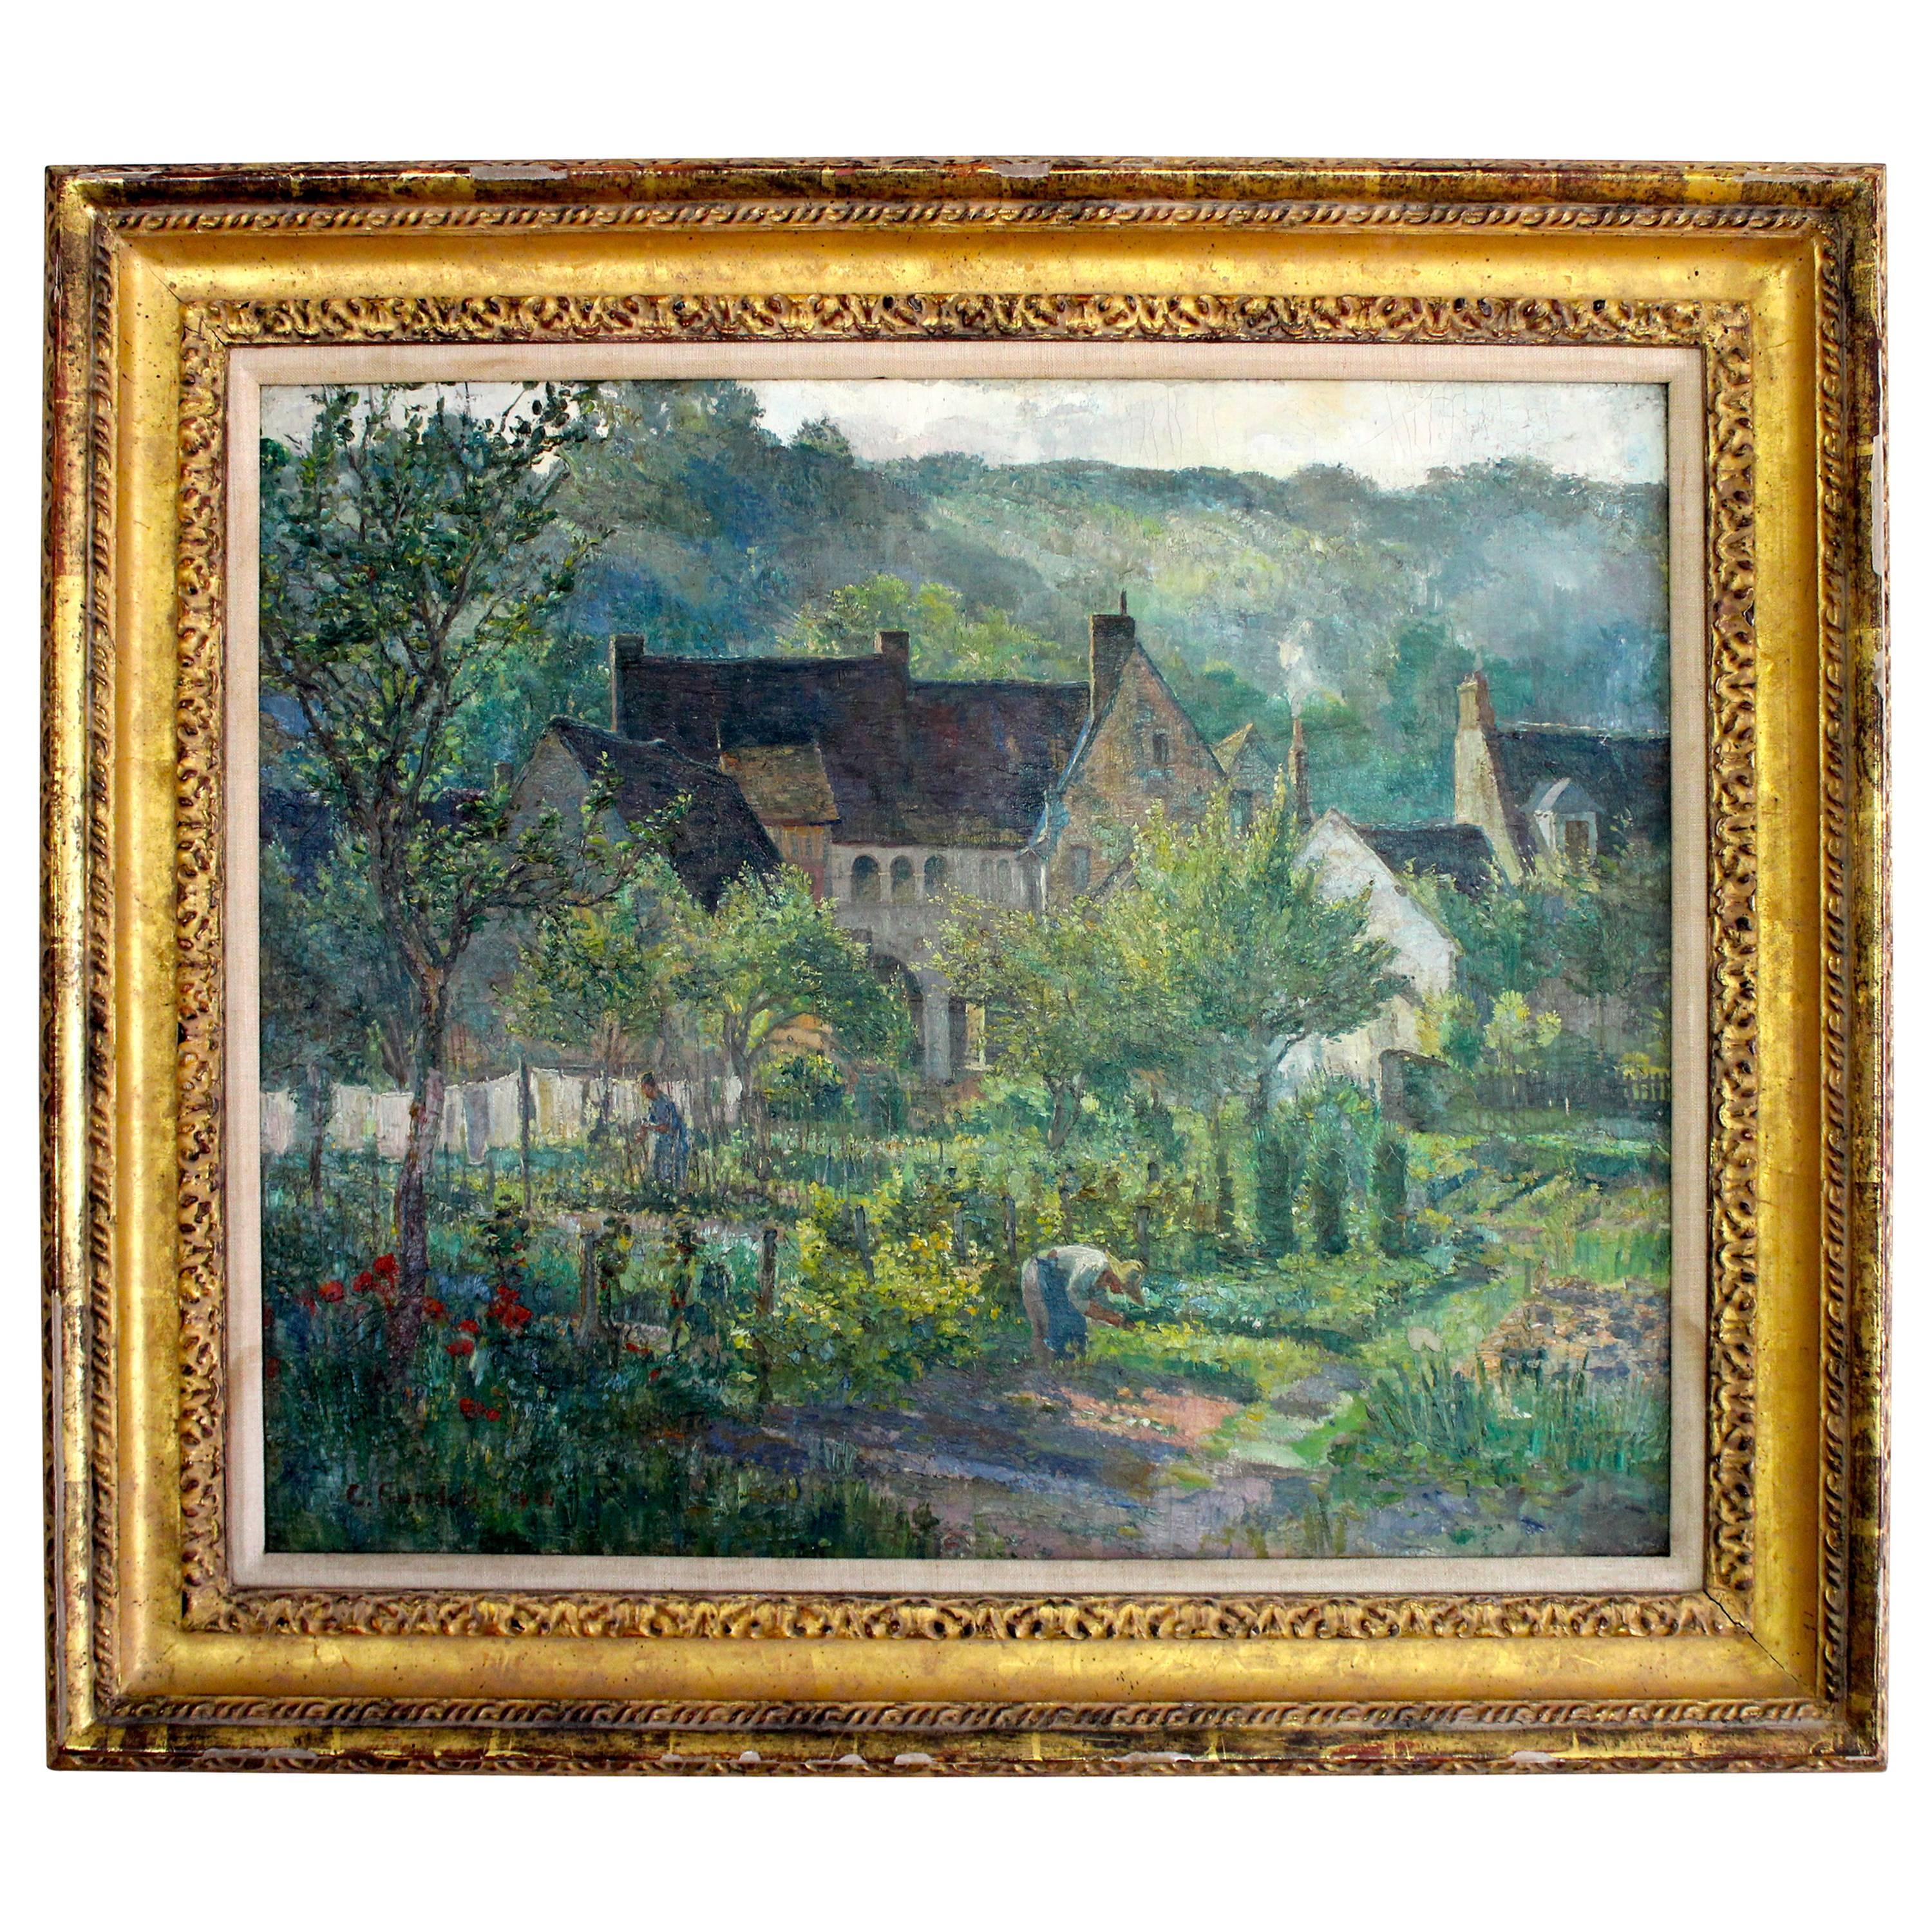 Impressionist Oil Painting, C. Cundall, 1926